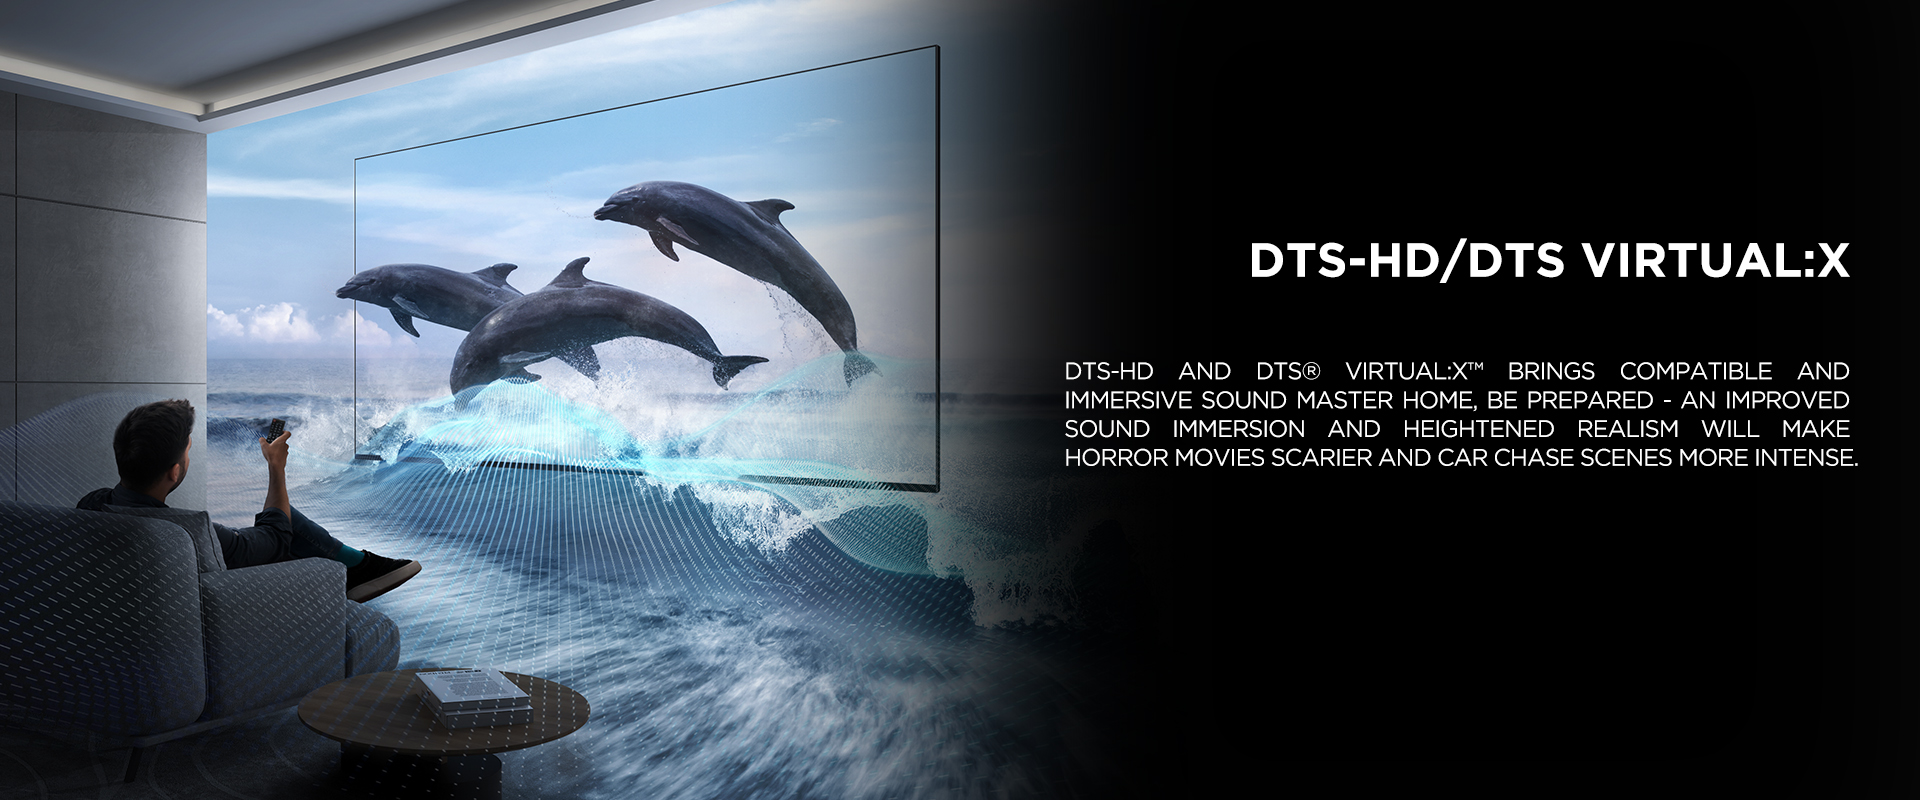 DTS-HD/DTS Virtual:X - DTS-HD and DTS?? VIRTUAL:Xƒ?› brings compatible and immersive sound master home, be prepared - an improved sound immersion and heightened realism will make horror movies scarier and car chase scenes more intense.